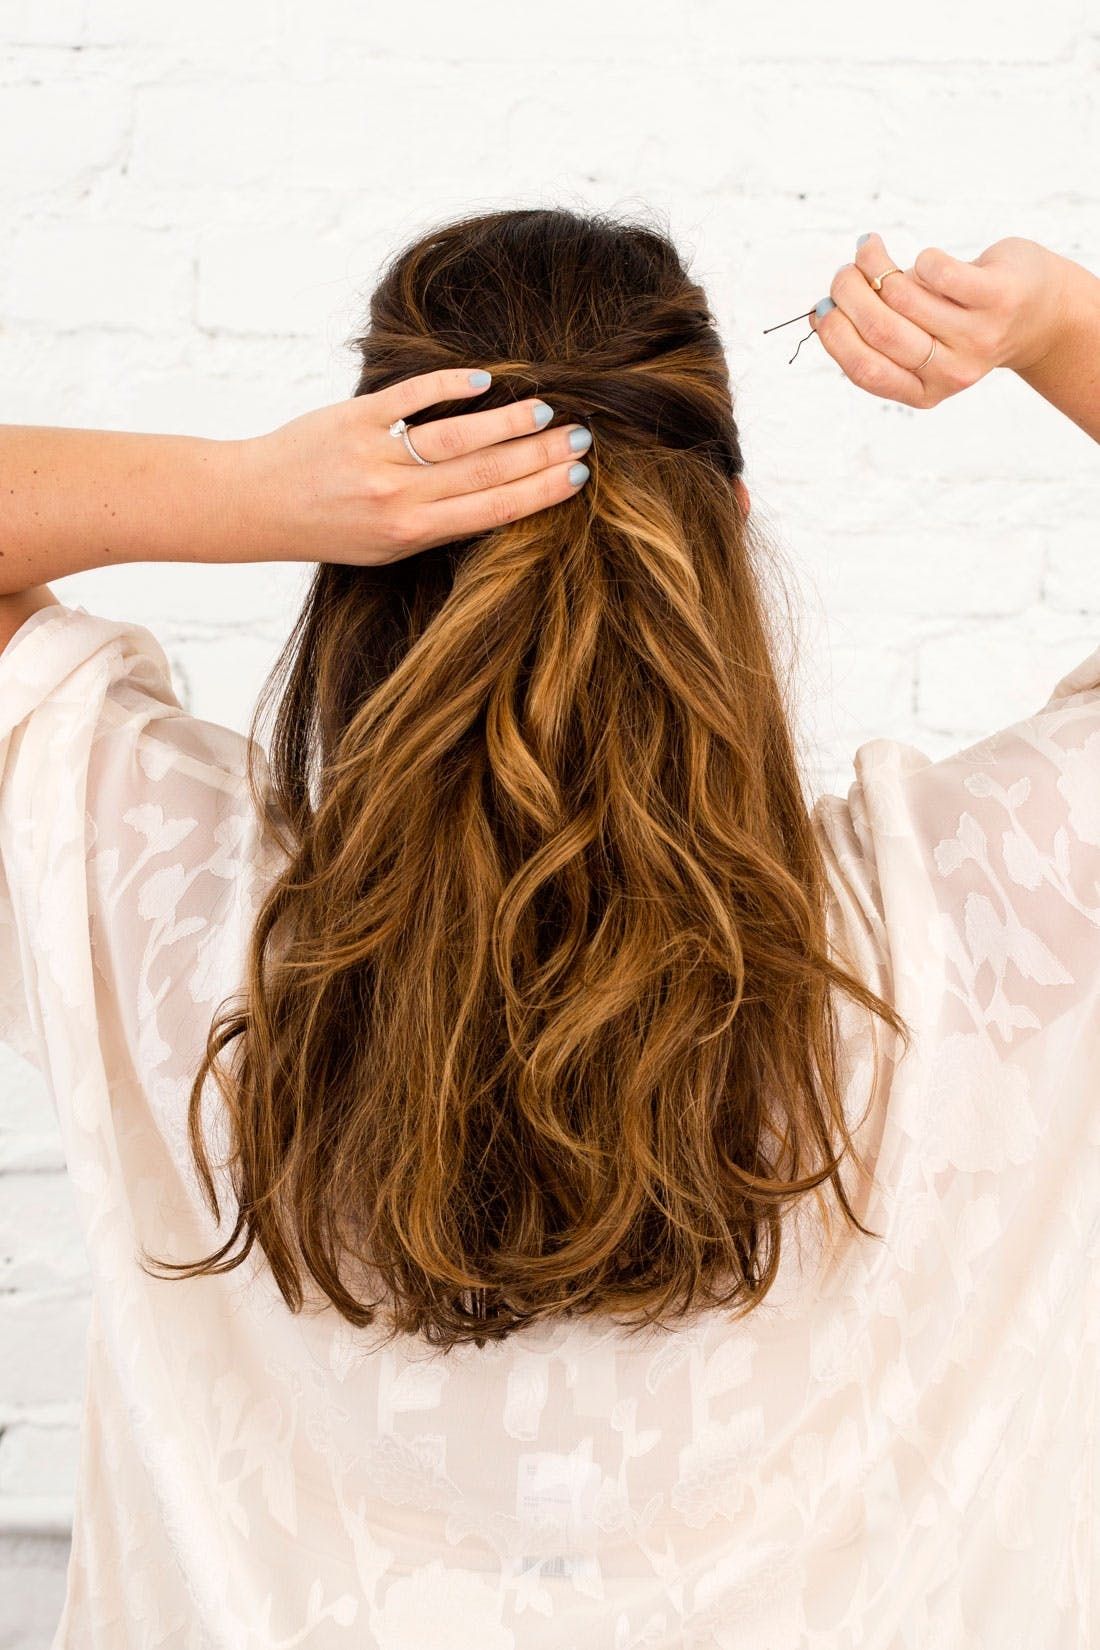 37 Long Hair Styles That Are Quick, Easy, and On Trend in 2023